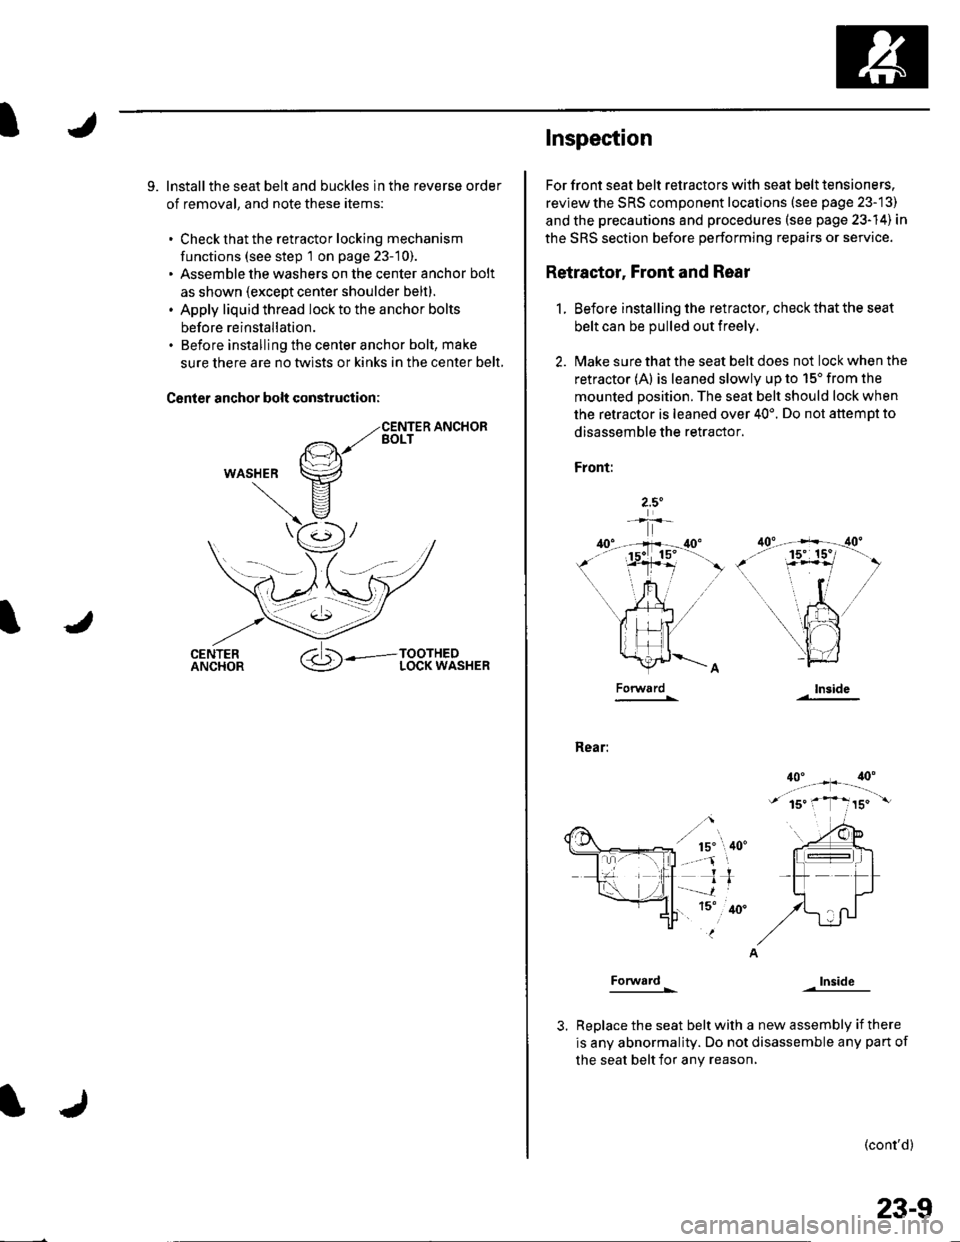 HONDA CIVIC 2003 7.G Workshop Manual I
9. lnstallthe seat belt and buckles in the reverse order
of removal, and note these items:
. Check that the retractor locking mechanism
functions (see step 1 on page 23-10).. Assemble the washers on